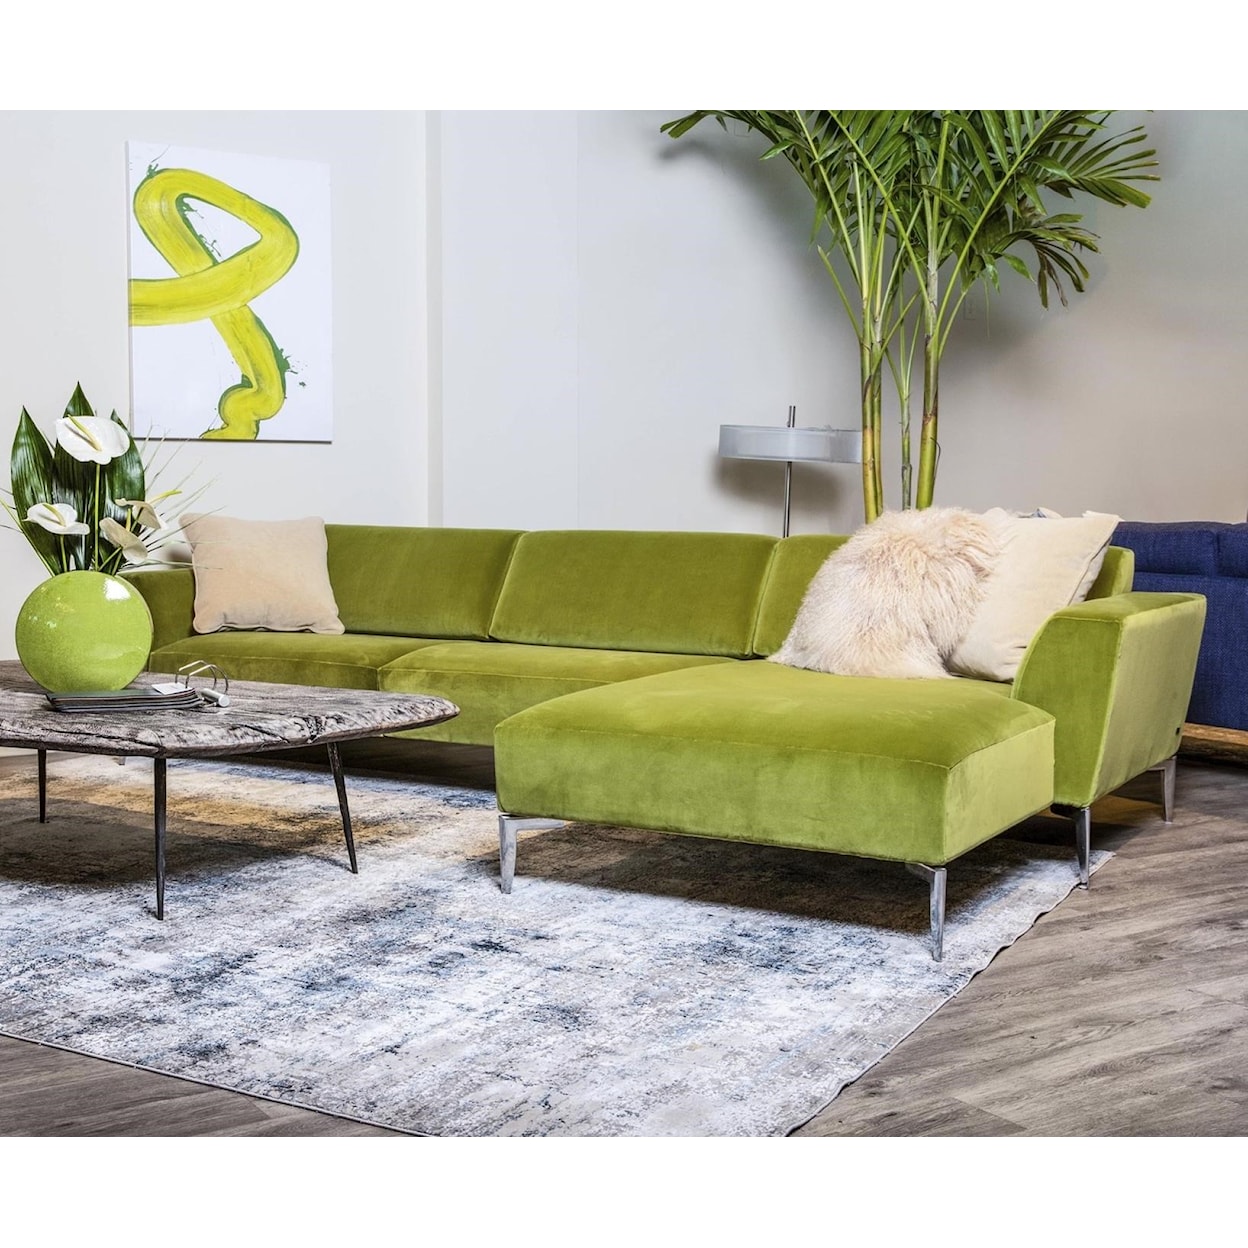 American Leather Adriana Sofa with Chaise